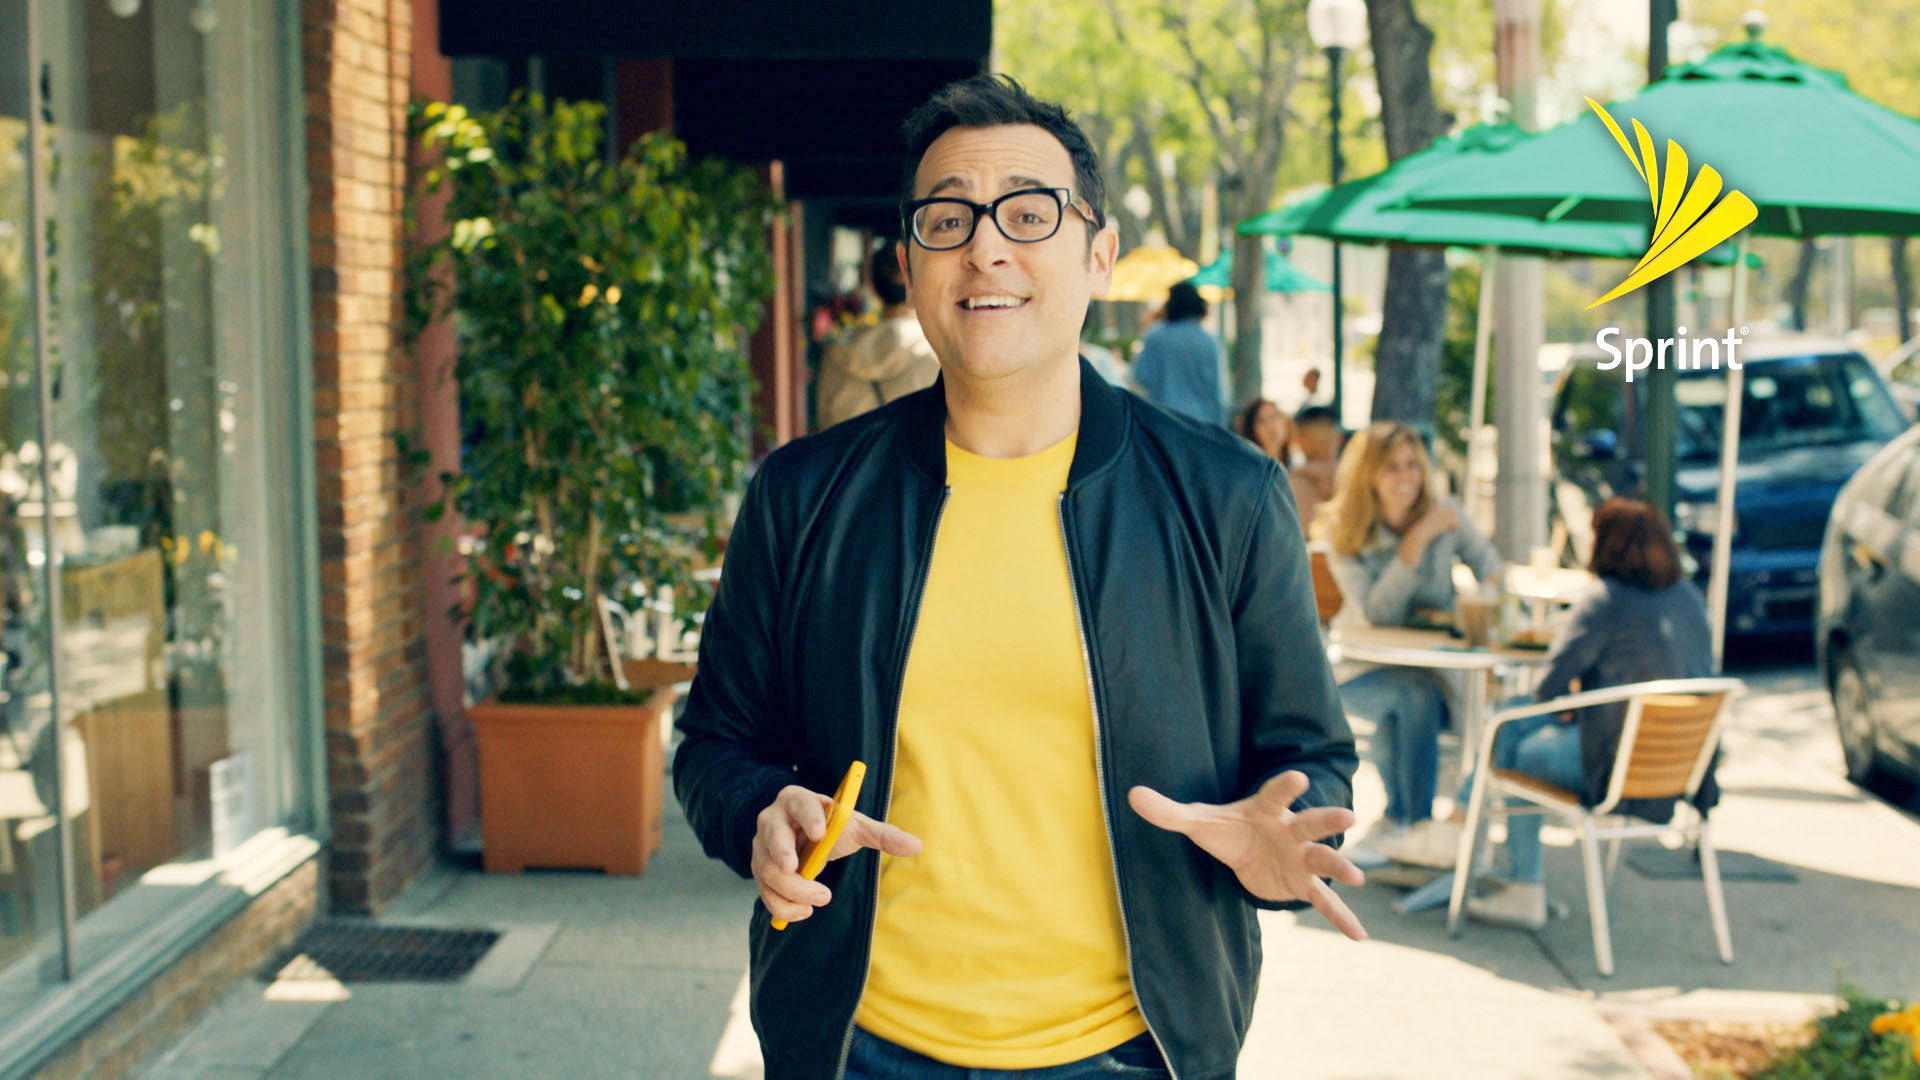 Sprint poached Verizon&#039;s &#039;Can you hear me now?&#039; guy